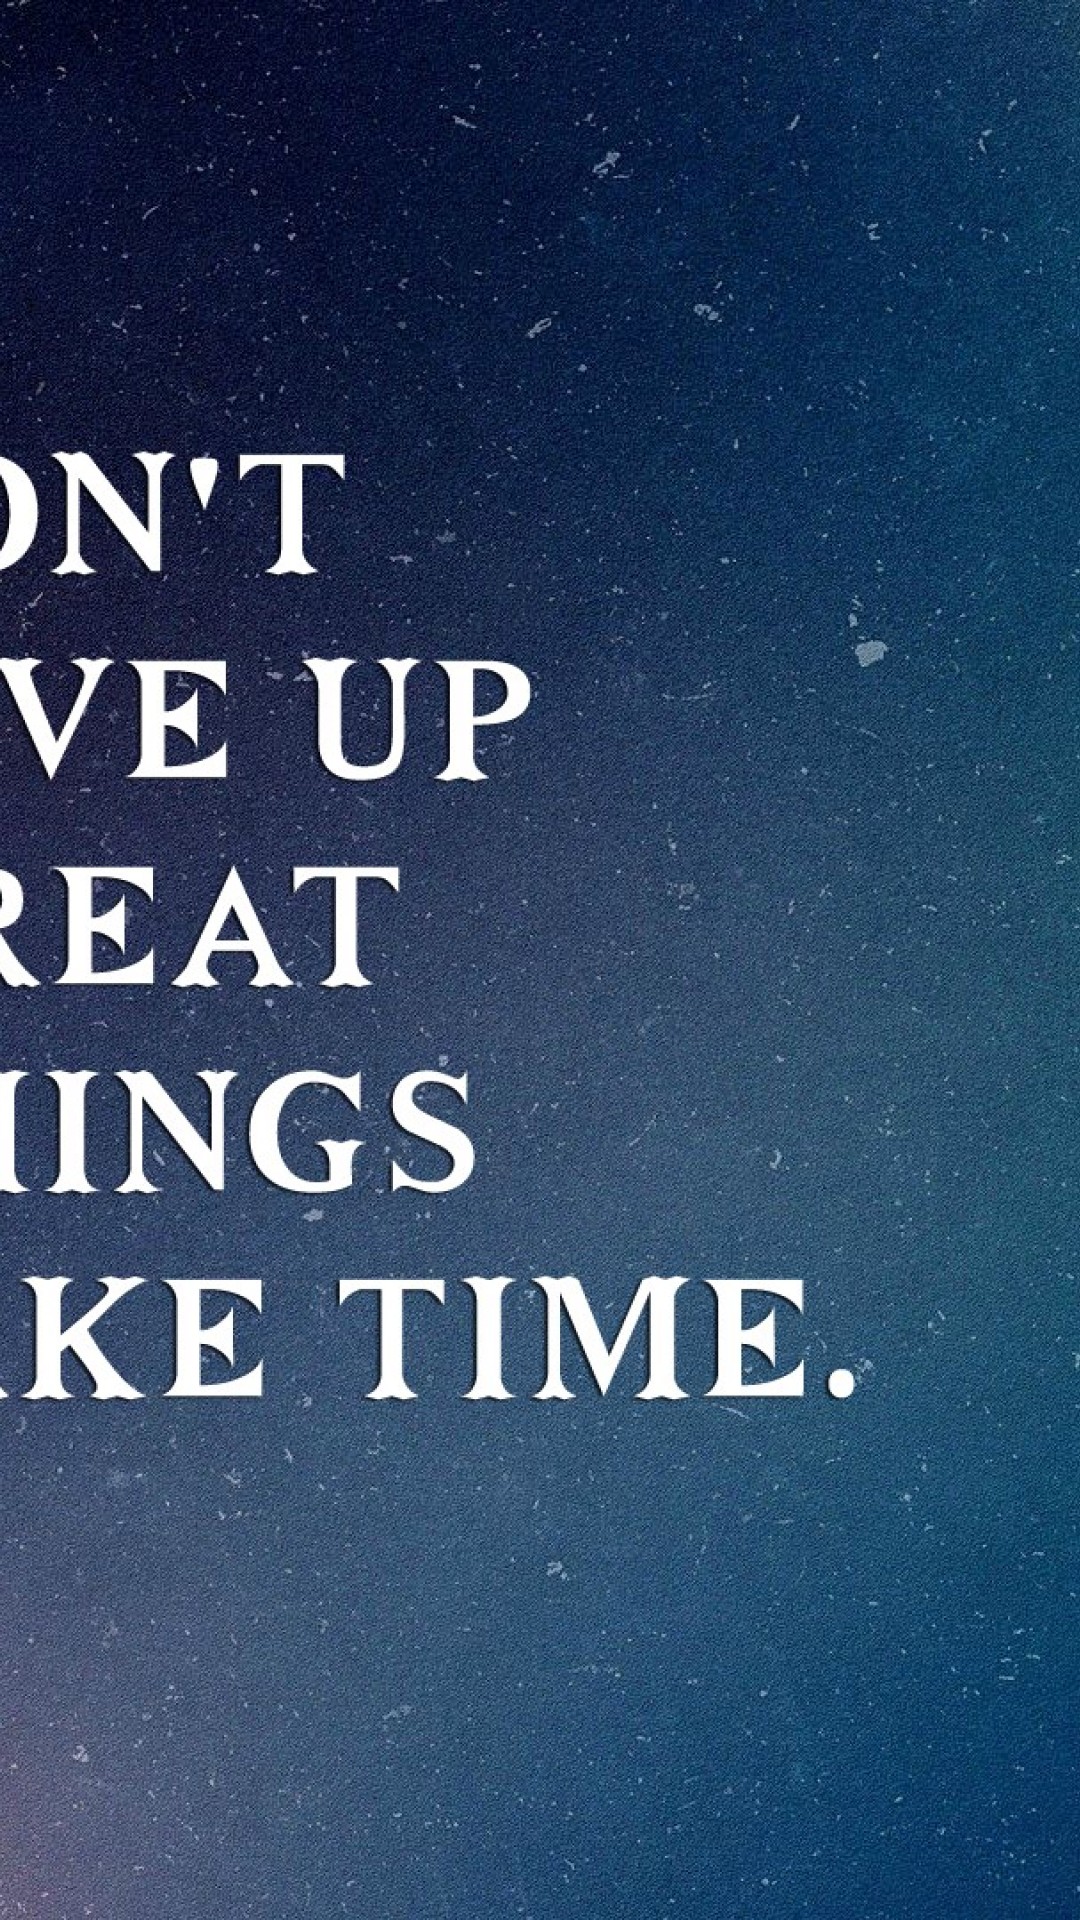 Never Give Up Great Things Take Time Wallpaper for Desktop and Mobiles  iPhone 6 / 6S Plus - HD Wallpaper 